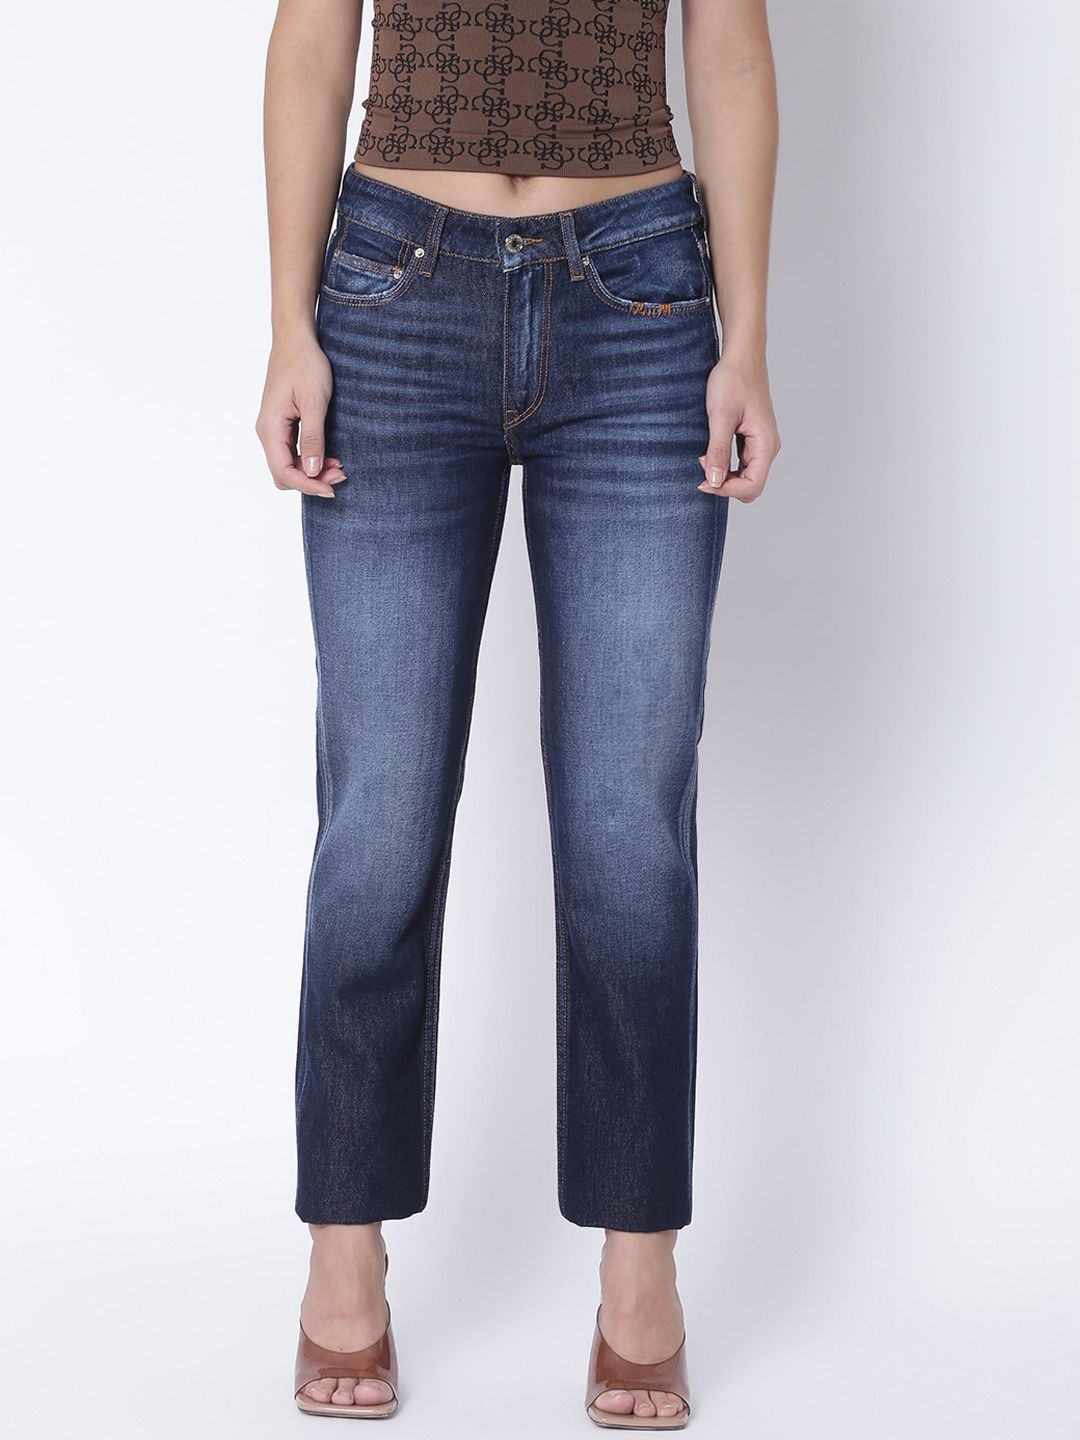 GUESS Women Multicoloured Low Distress Light Fade Jeans Price in India